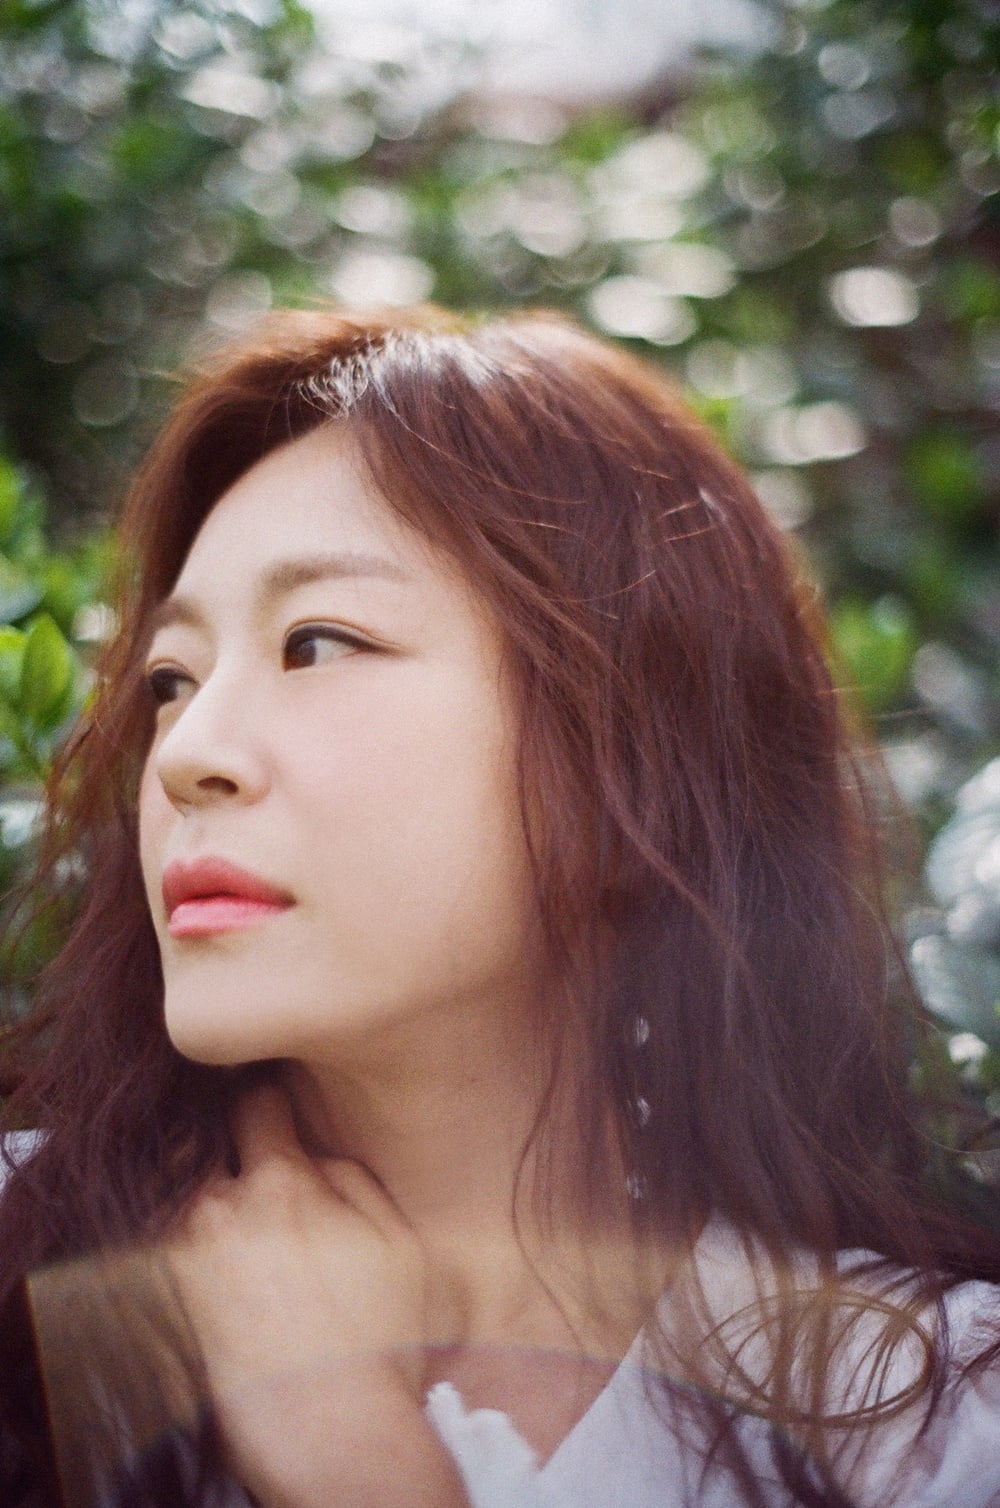 Lee Young-hyun's remake 'To You', music chart